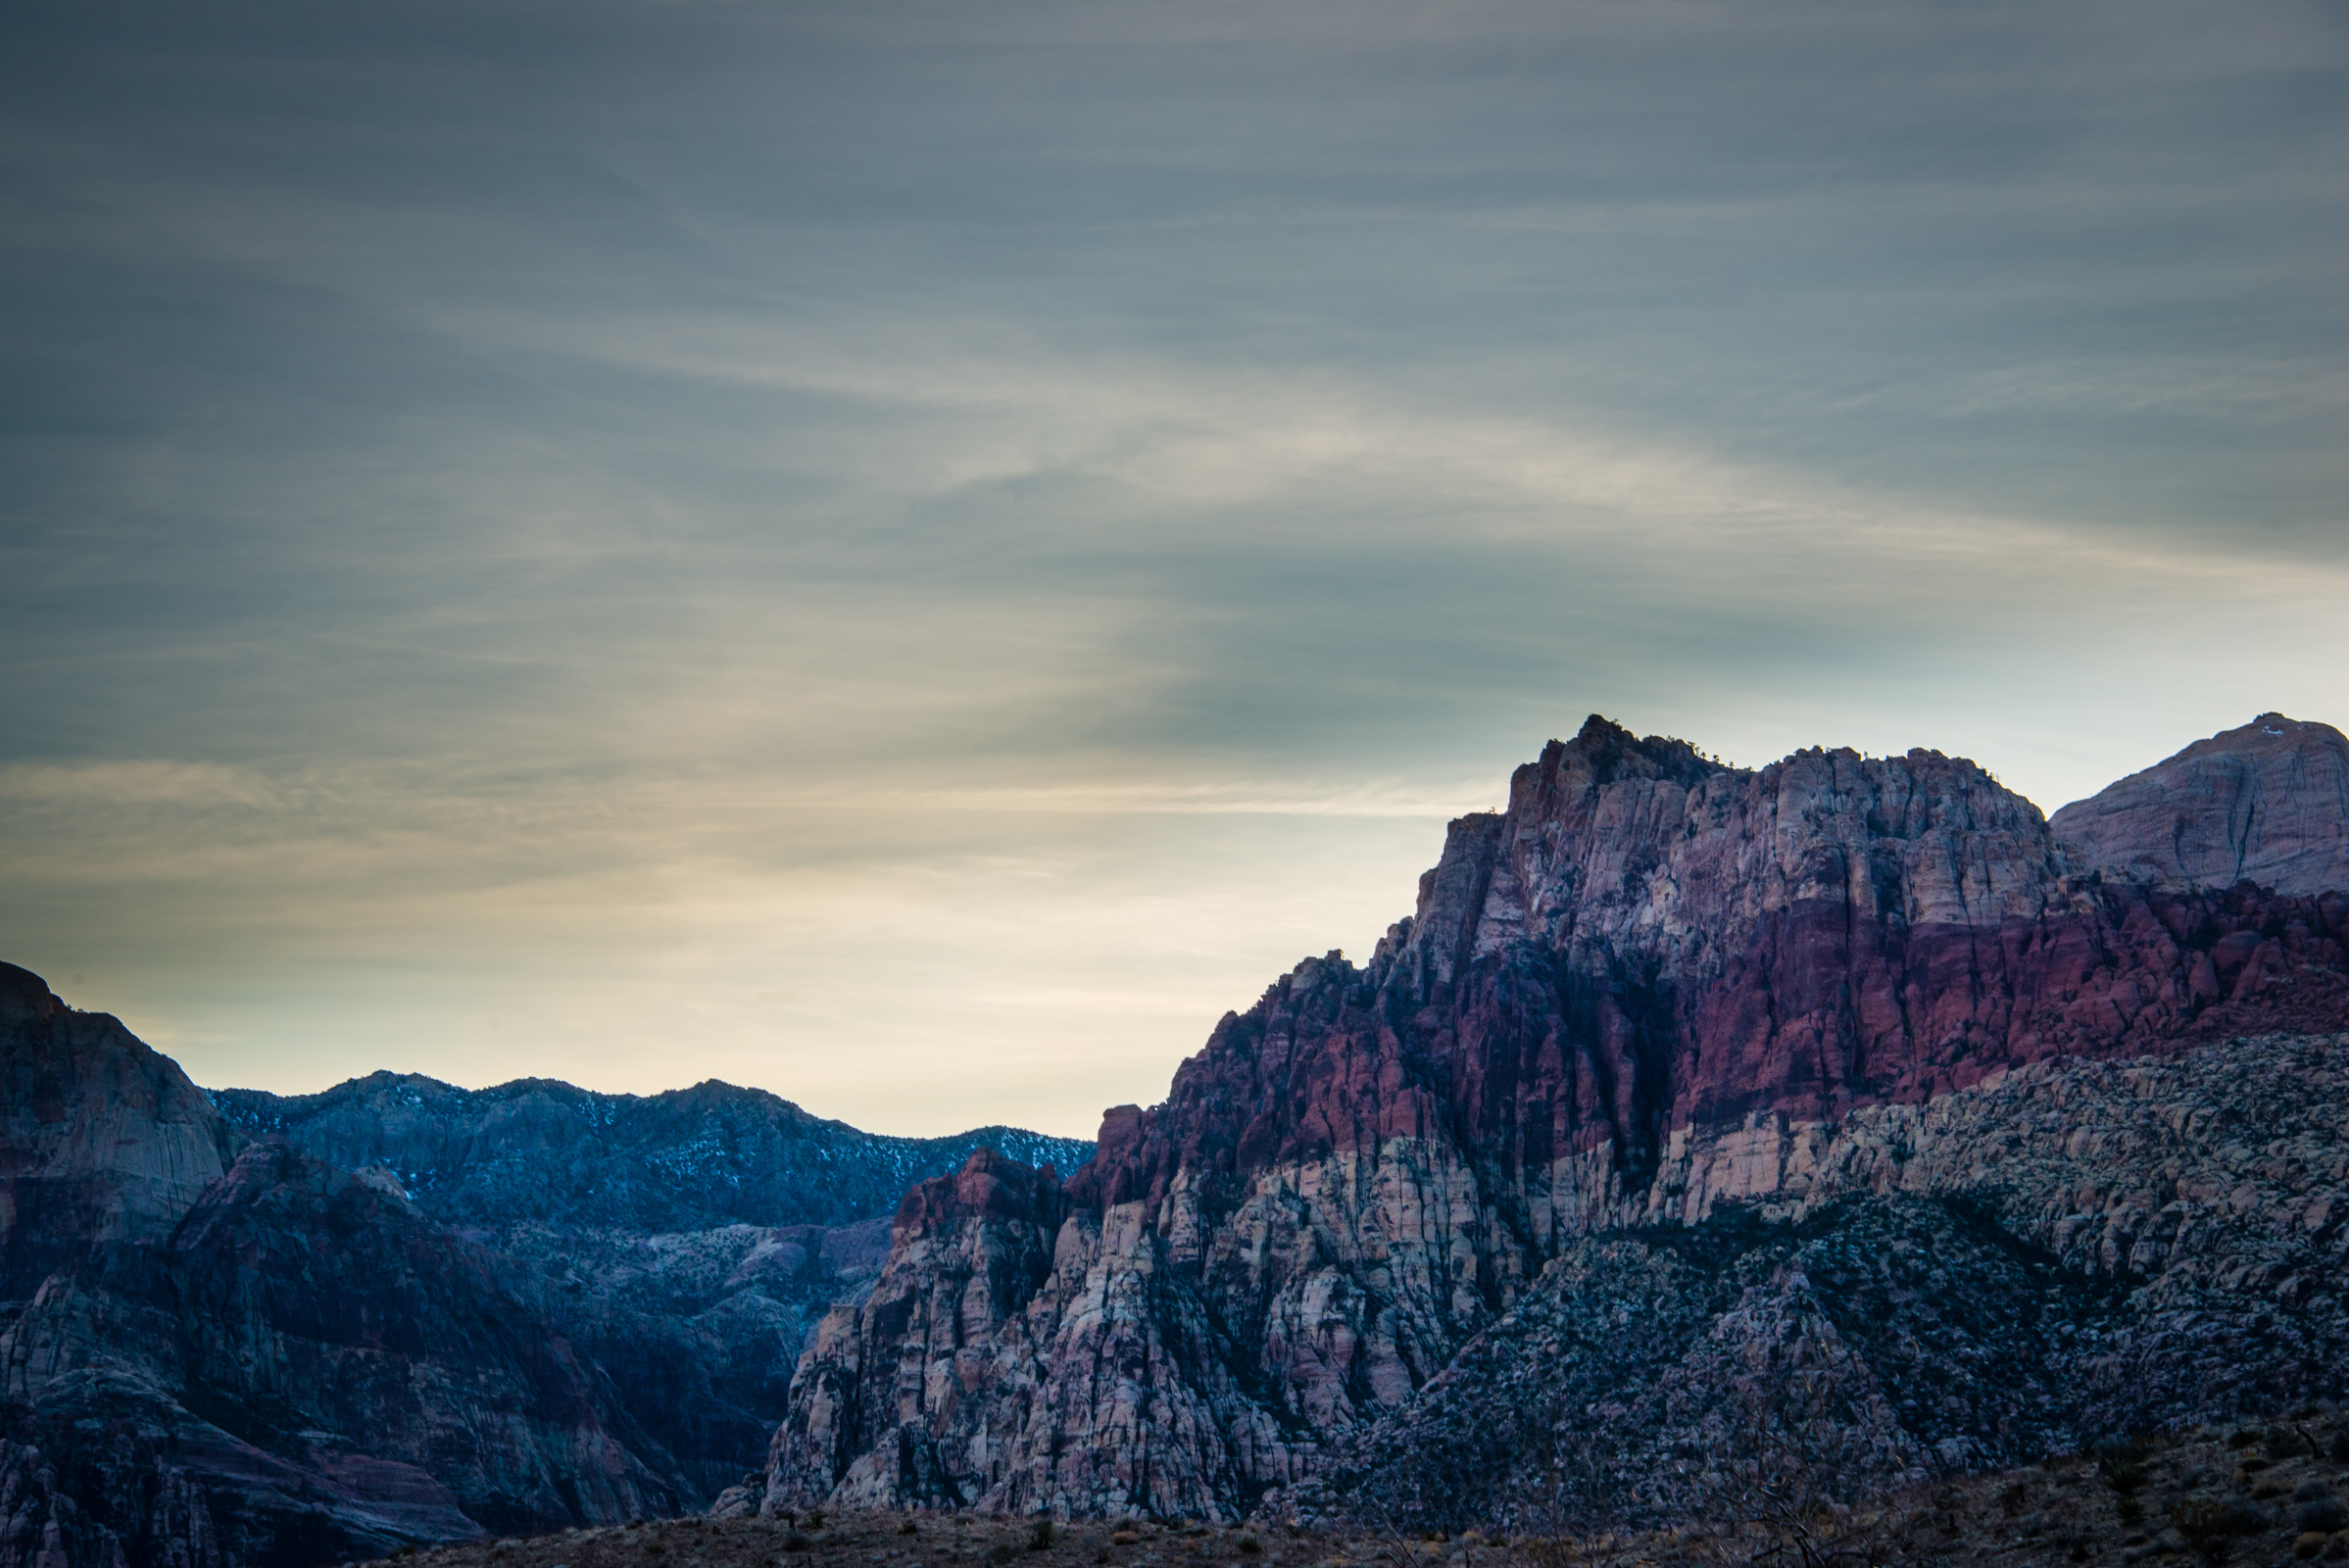 sunset at red rock canyon, nevada, photographed by jamie bannon photography.